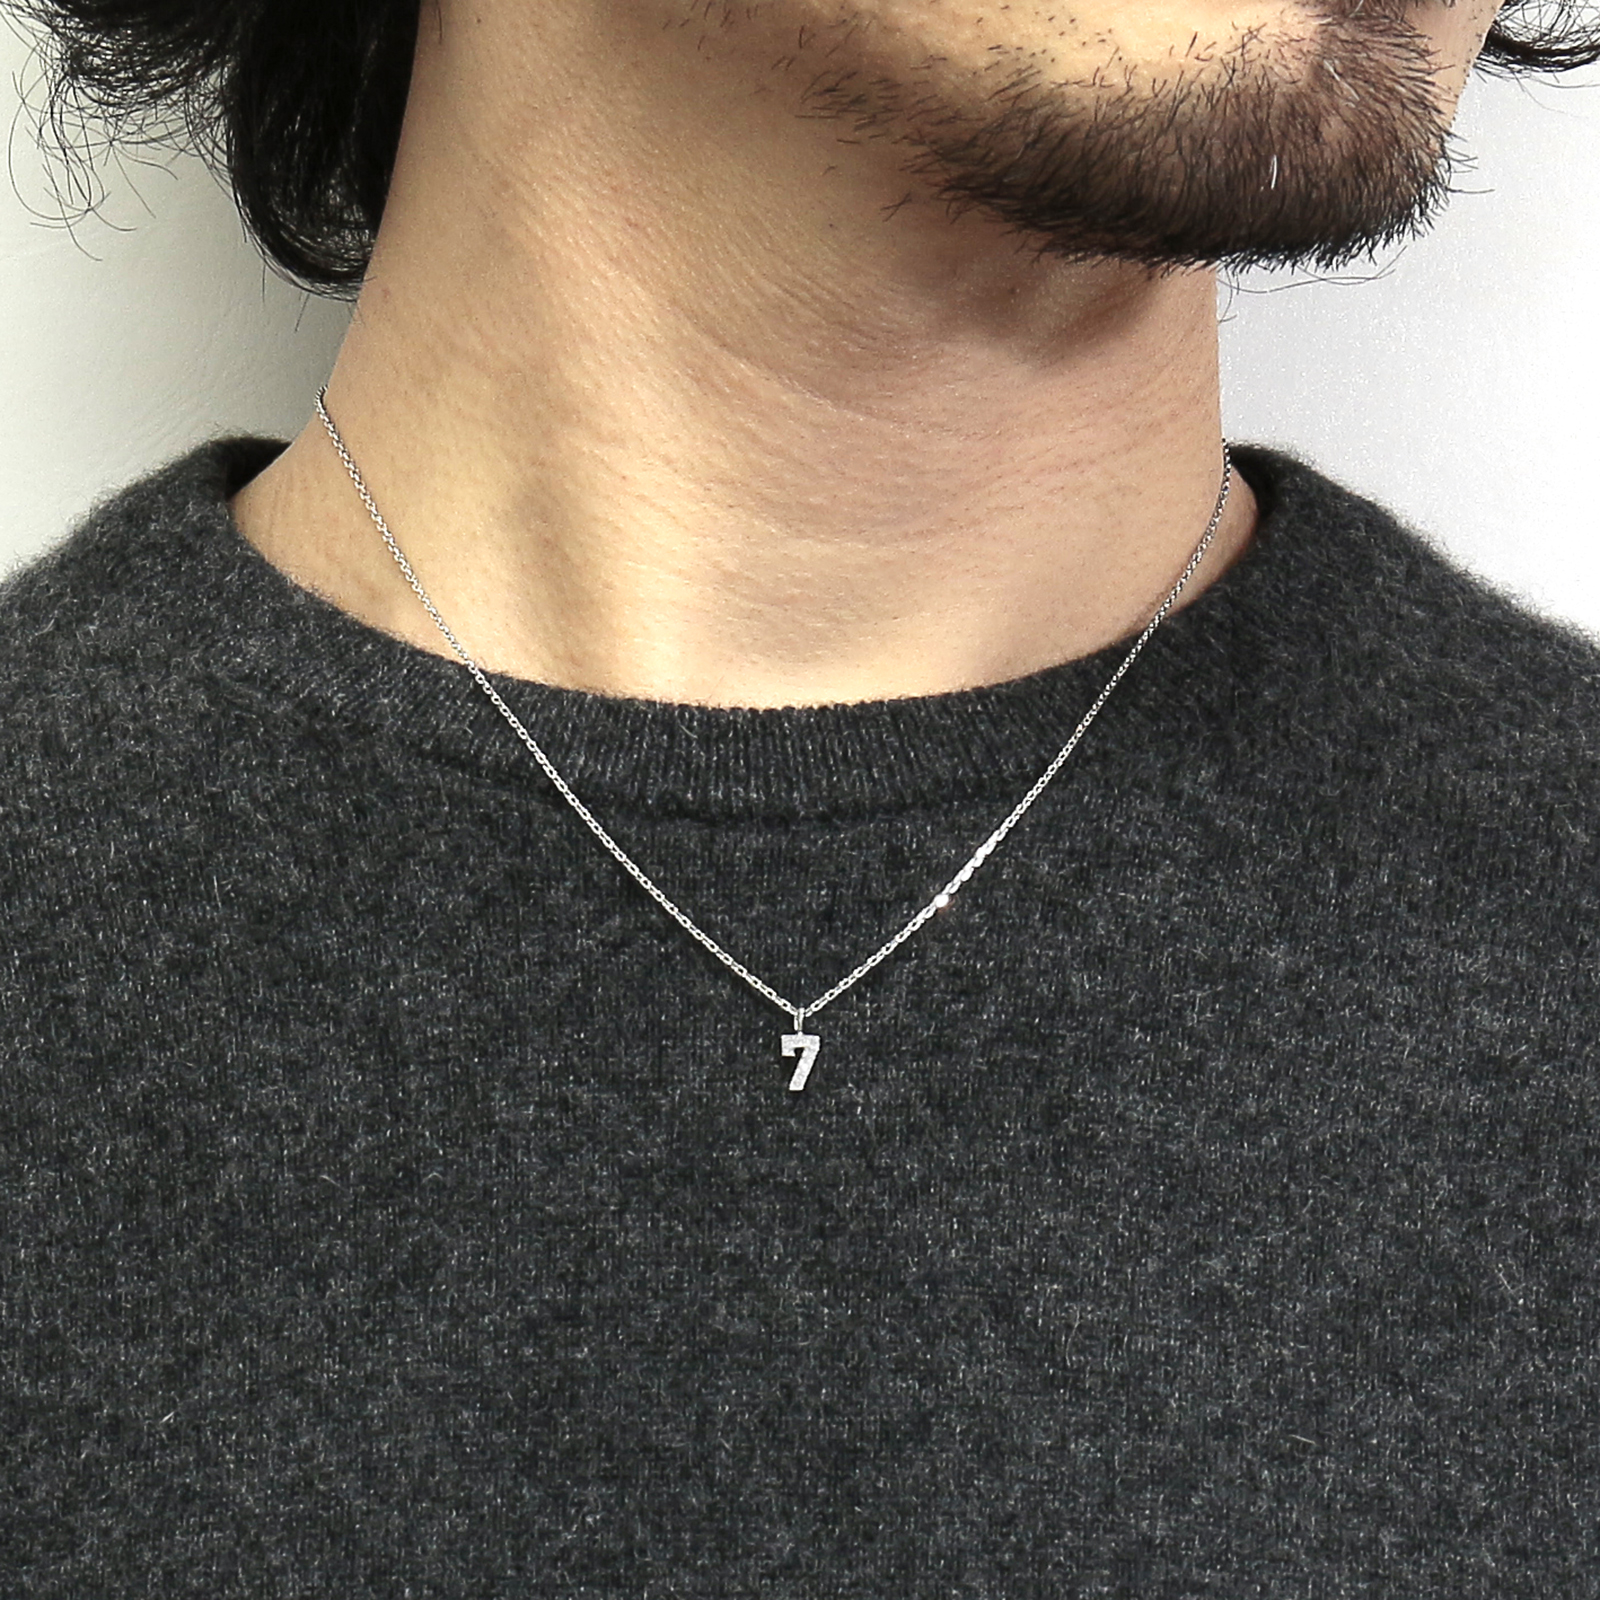 GARDEL（ガーデル） Number Necklace - Silver w/CZ（ナンバー 